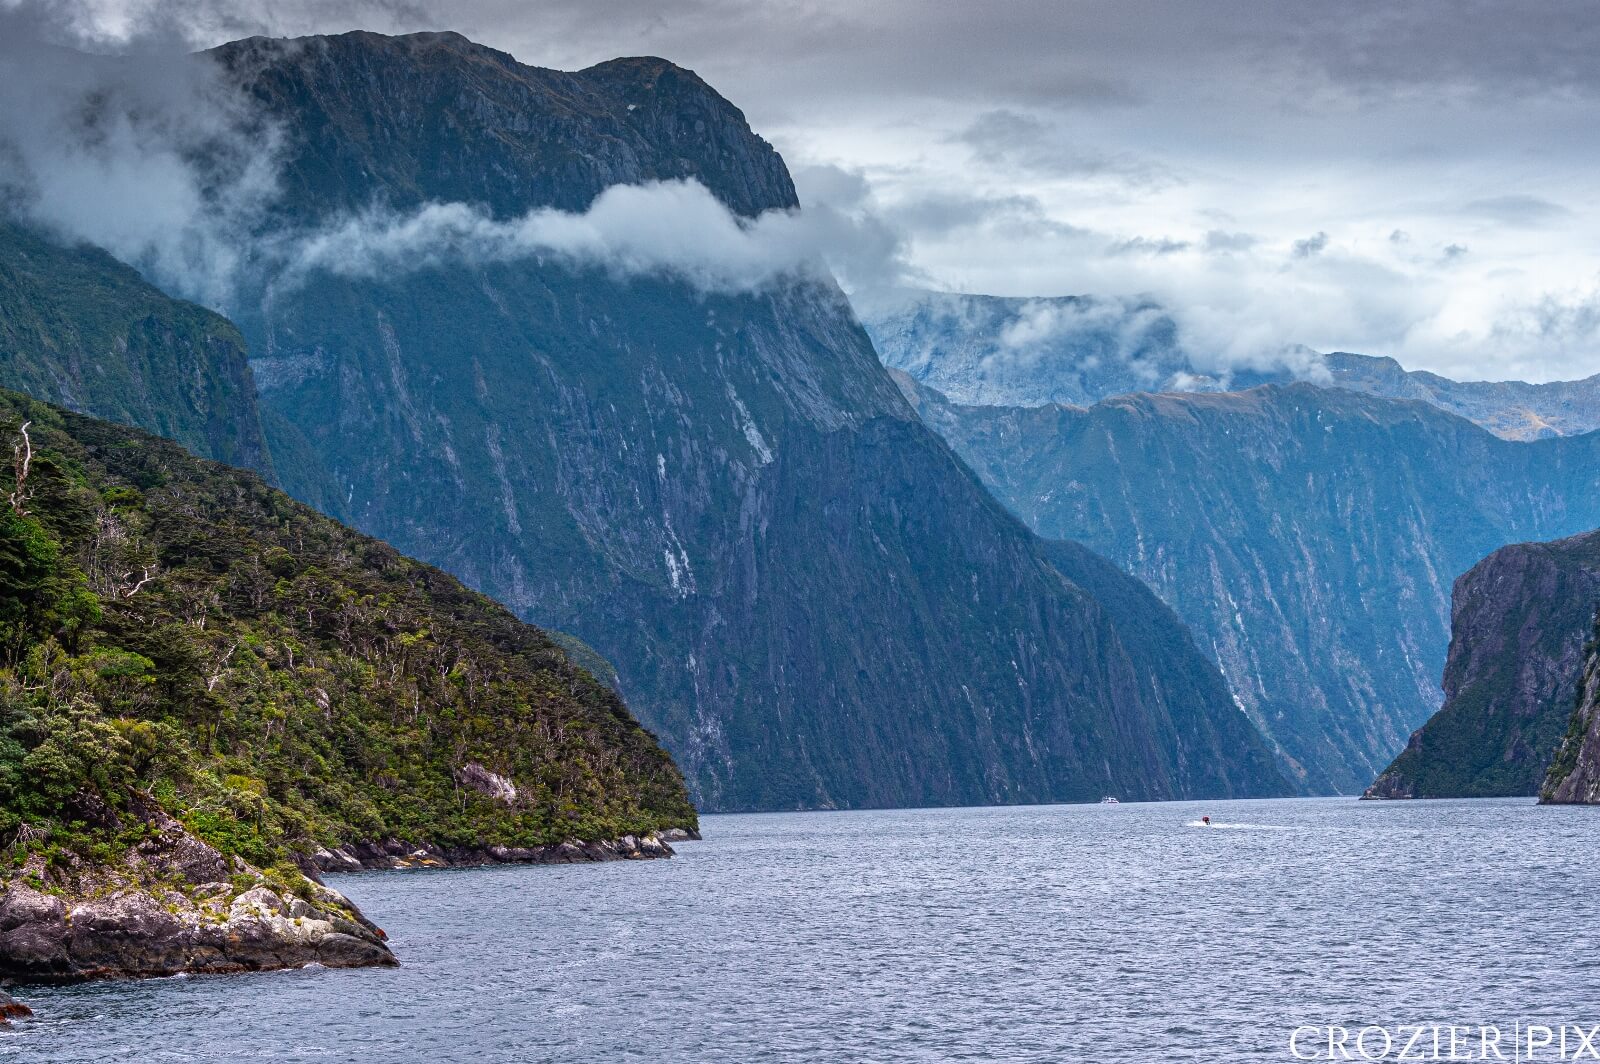 Image of Milford Sound Boat Cruise by Alan Crozier